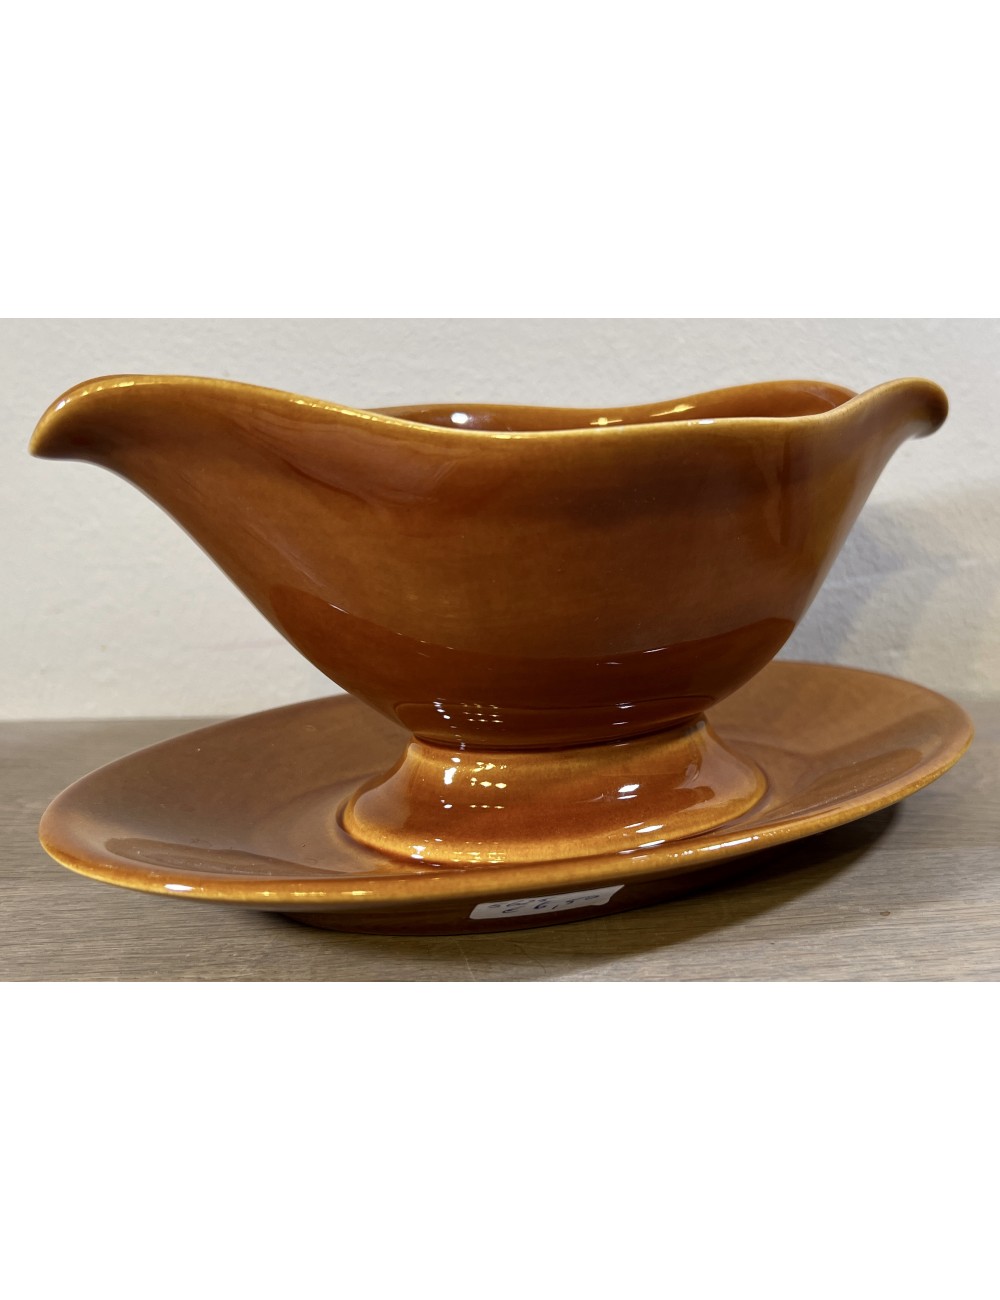 Gravy boat / Sauce bowl - unmarked (probably Villeroy & Boch) - executed in brown ceramic